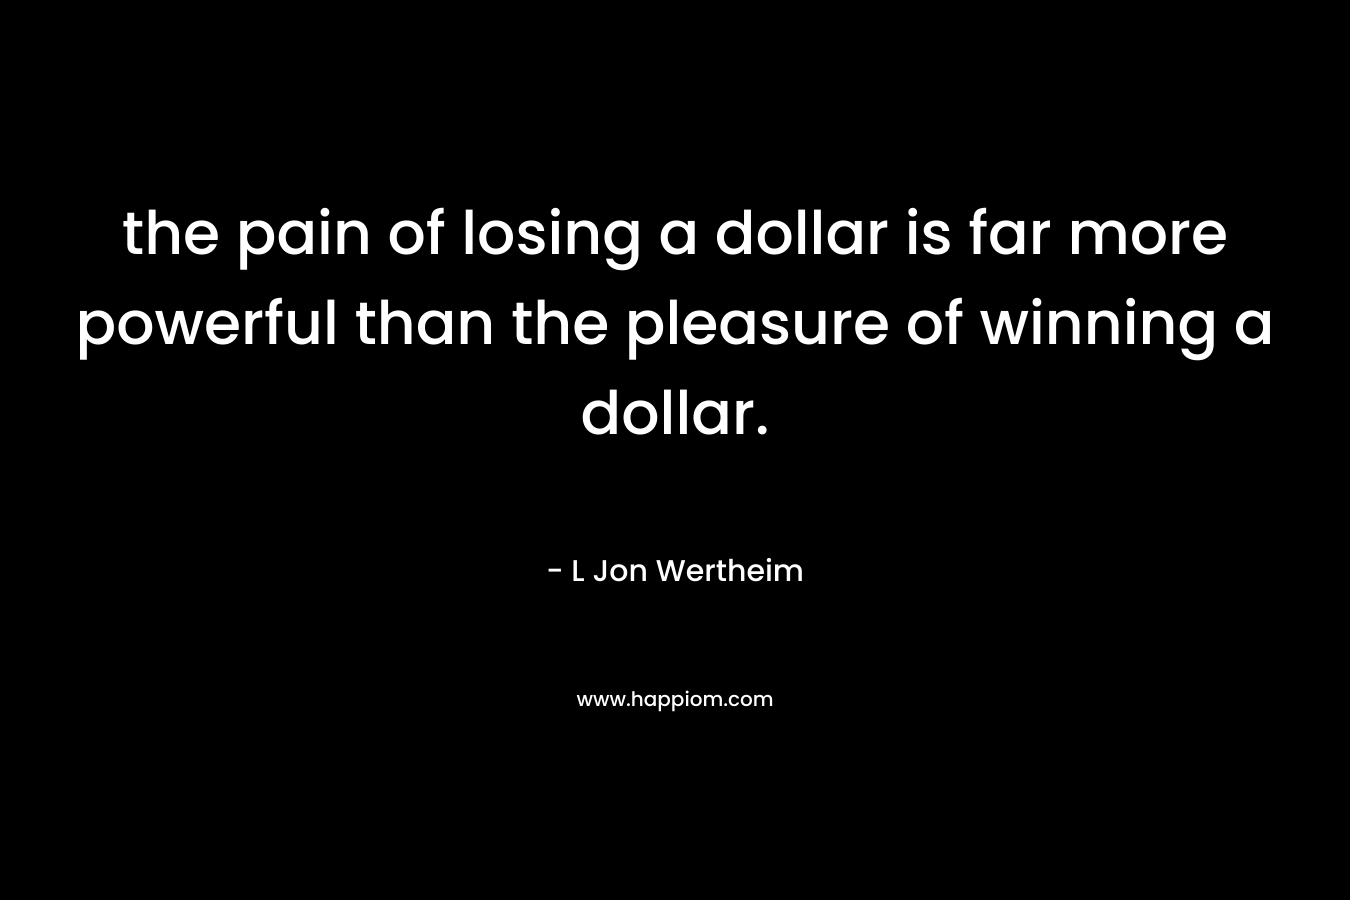 the pain of losing a dollar is far more powerful than the pleasure of winning a dollar.